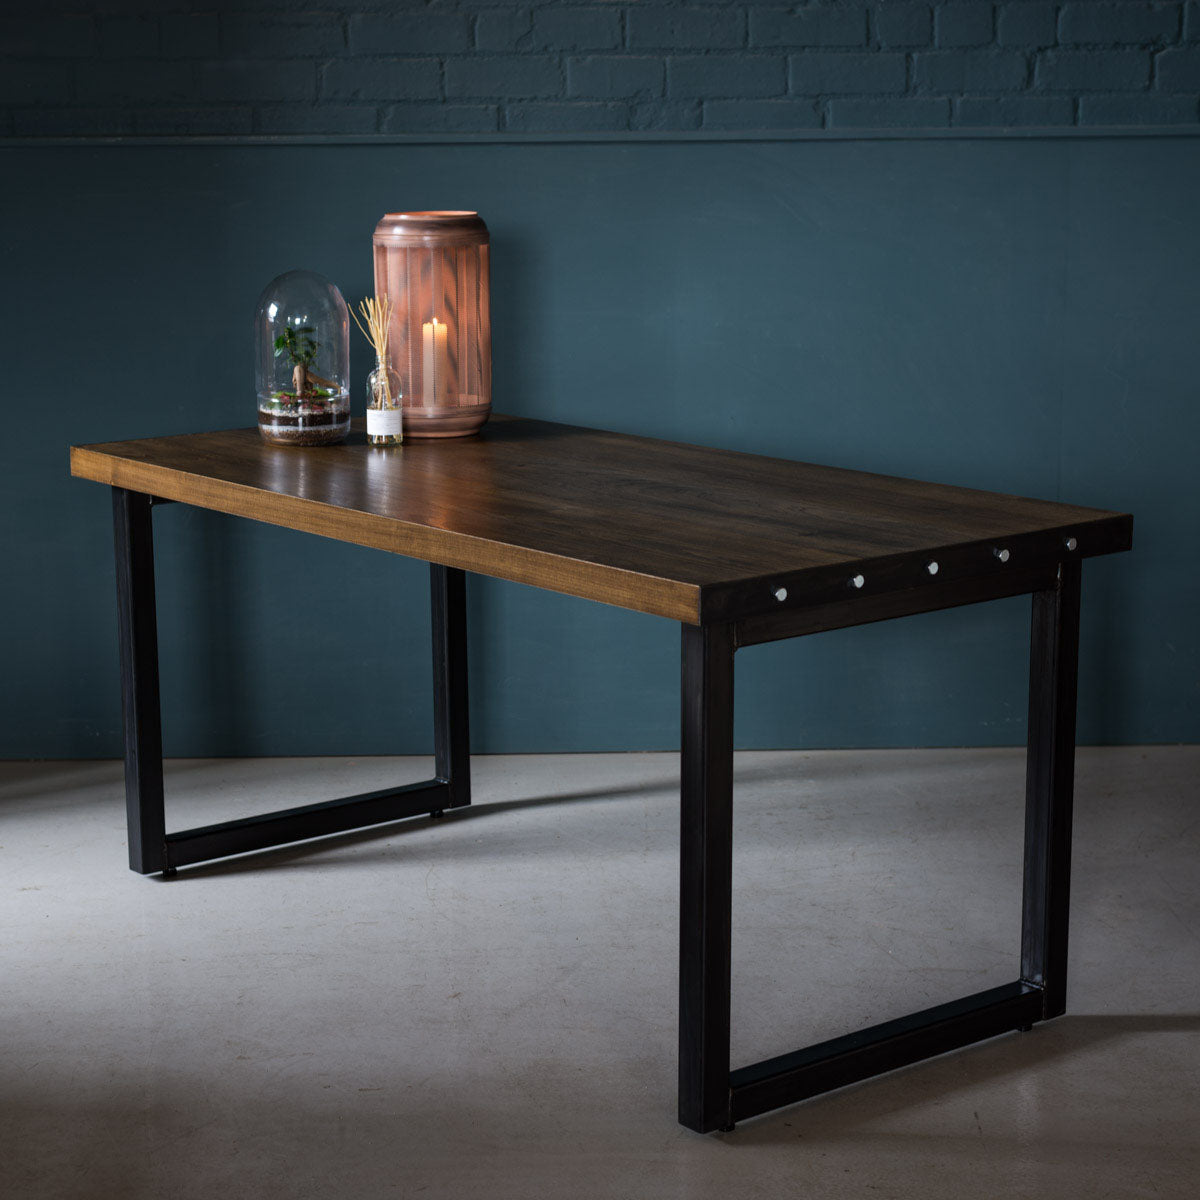 An image of the Industrial Table, Bolt product available from Koda Studios